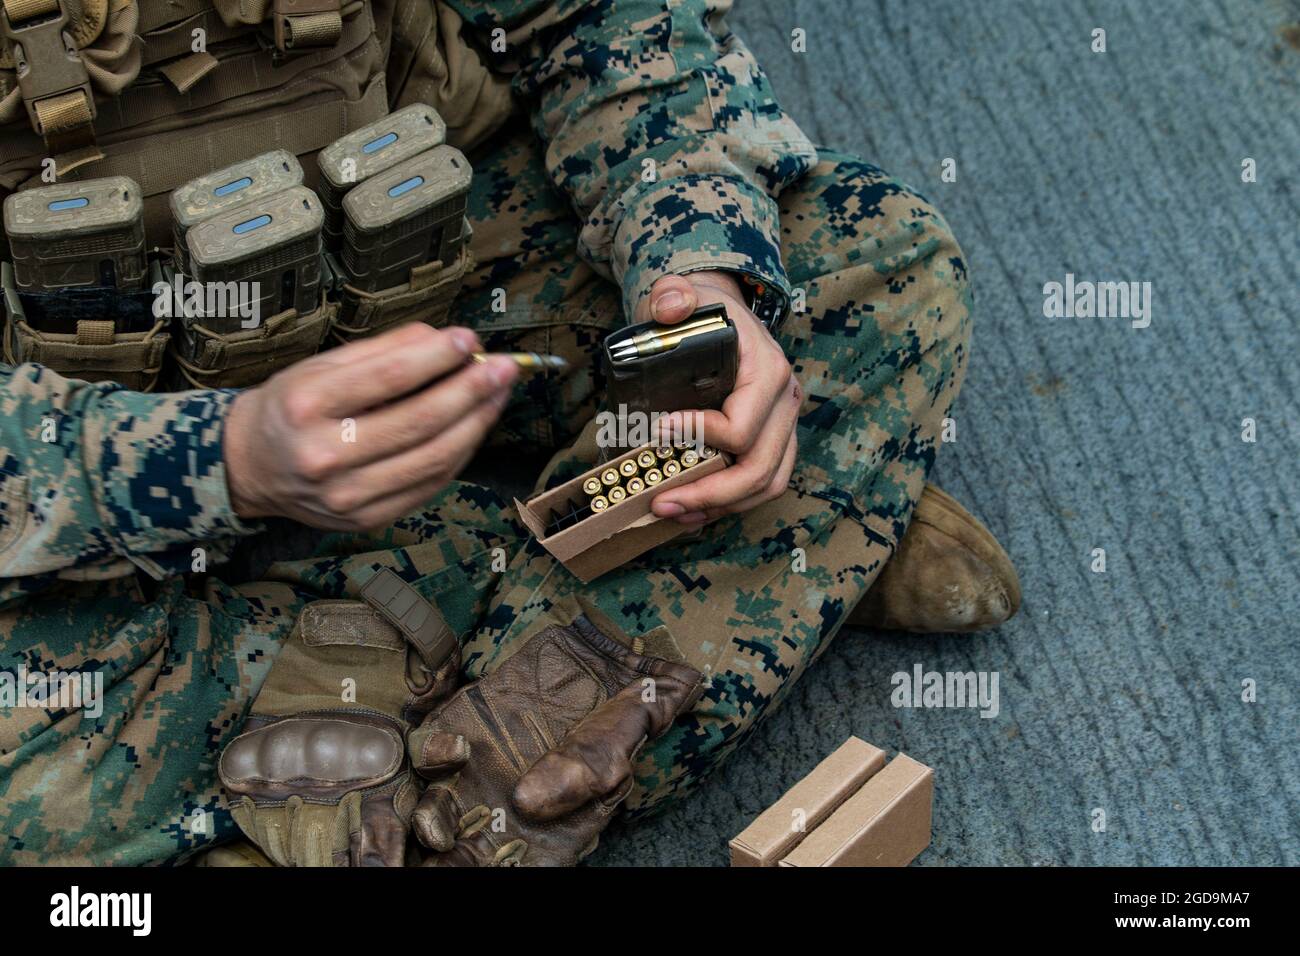 A U.S. Marine with Battalion Landing Team 3/5, 31st Marine Expeditionary Unit (MEU) loads a magazine with live ammunition for a range aboard USS Germantown in the Solomon Sea, August 2, 2021. The range was created to challenge Marines with obstacles to increase tactical proficiency. The 31st MEU is operating aboard ships of the America Expeditionary Strike Group in the 7th fleet area of operations to enhance interoperability with allies and partners and serve as a ready response force to defend peace and stability in the Indo-Pacific region. (U.S. Marine Corps photo by Cpl. Alexandria Nowell) Stock Photo